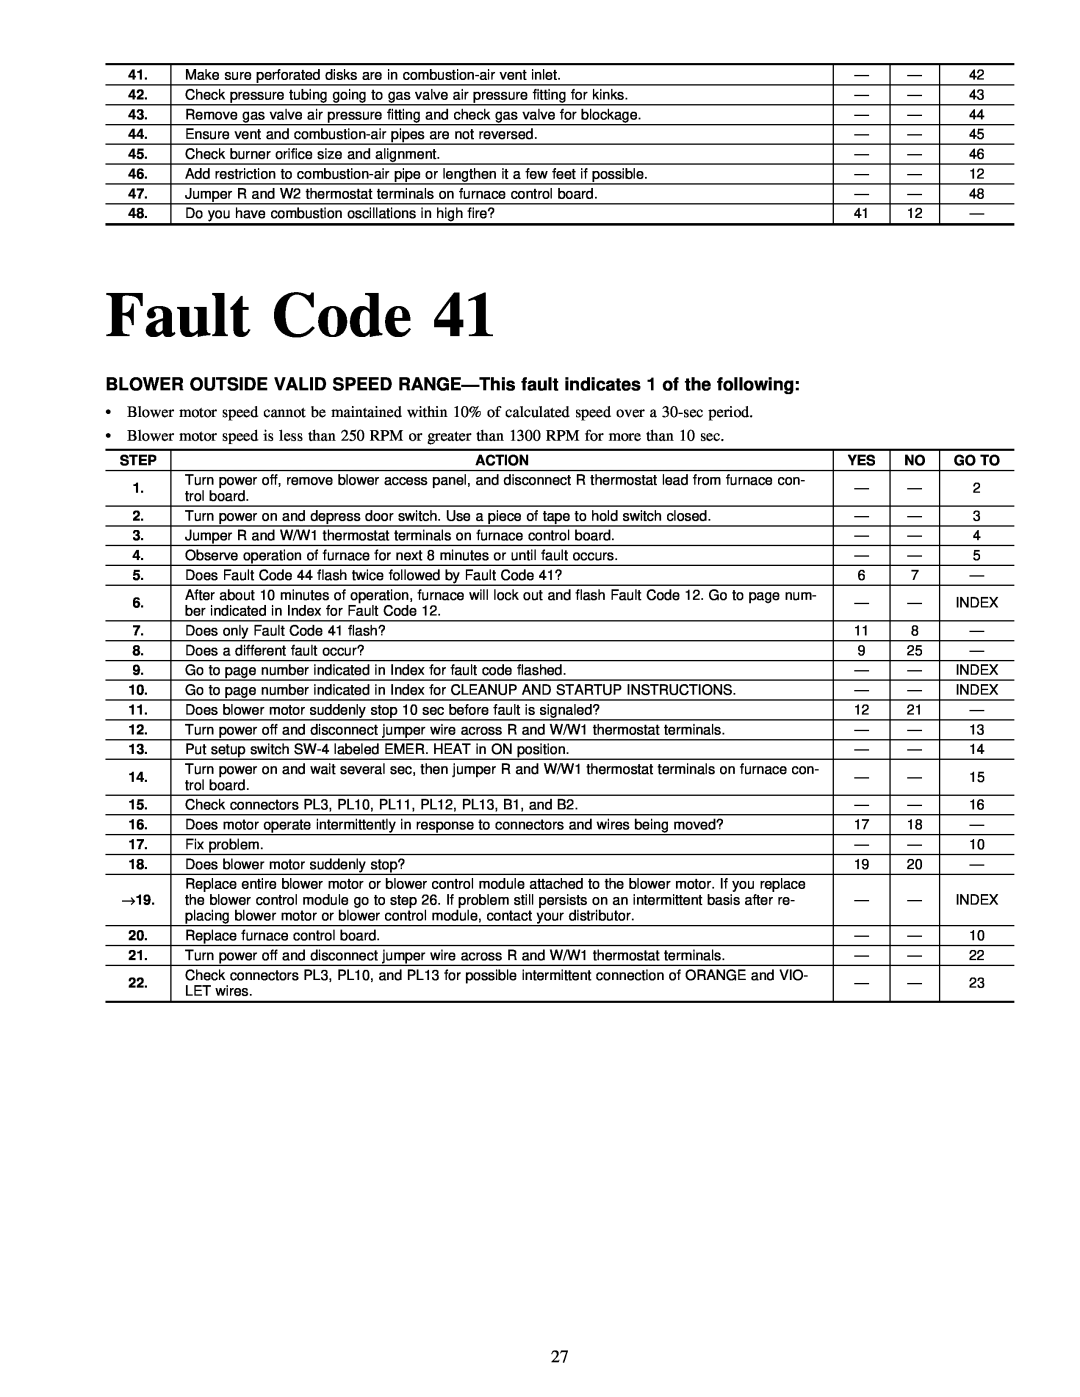 Carrier 58MVP instruction manual Fault Code, Check burner orifice size and alignment 